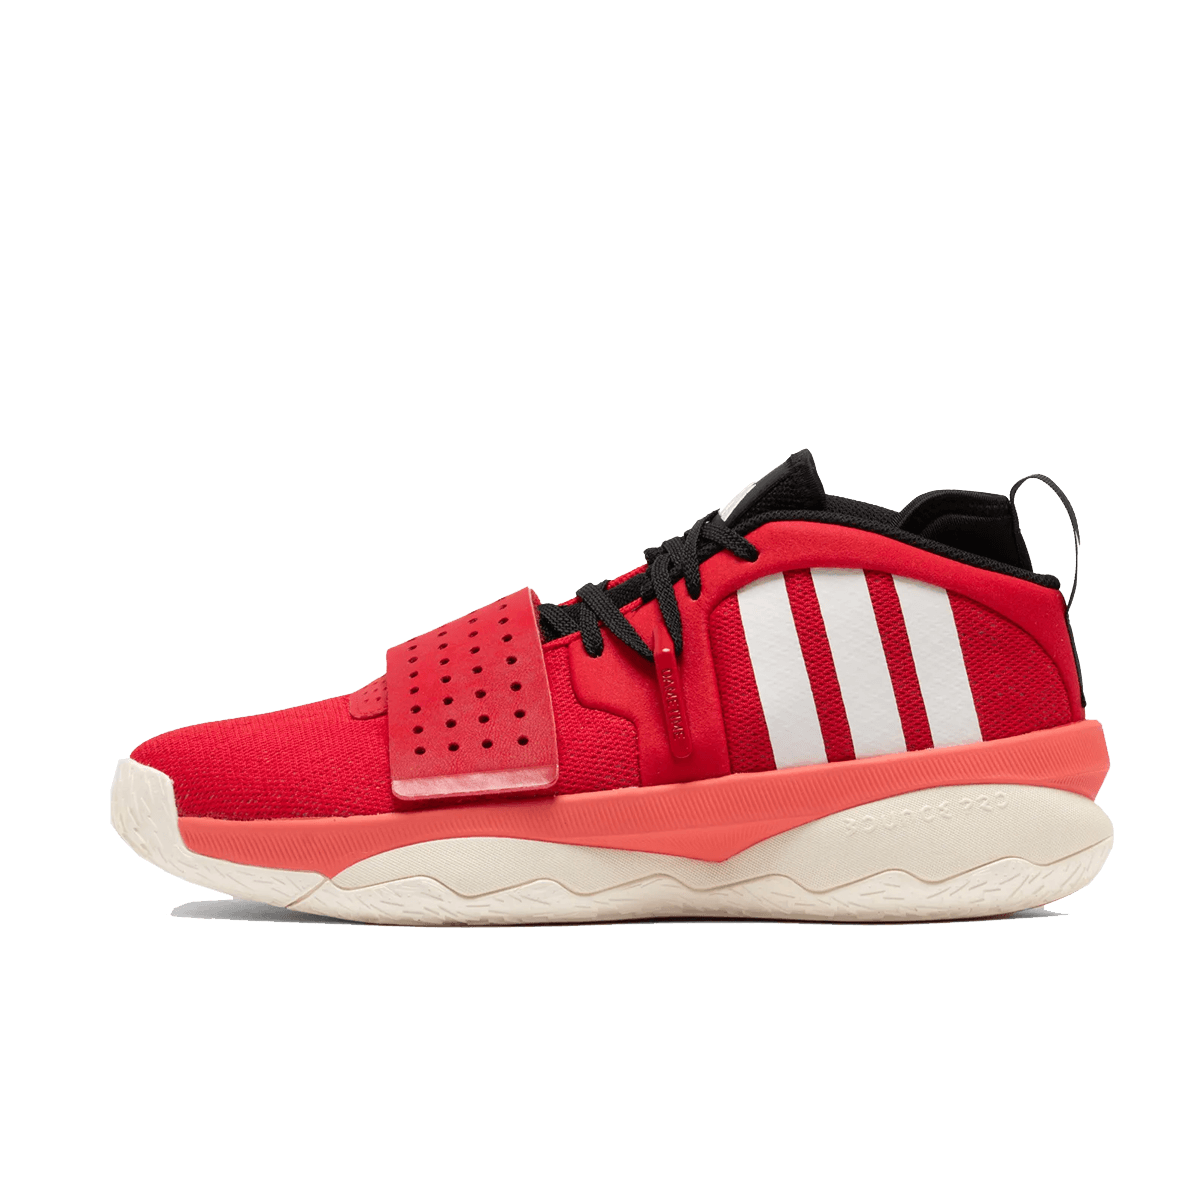 adidas Dame 8 Extply 'Better Scarlet' IF1506